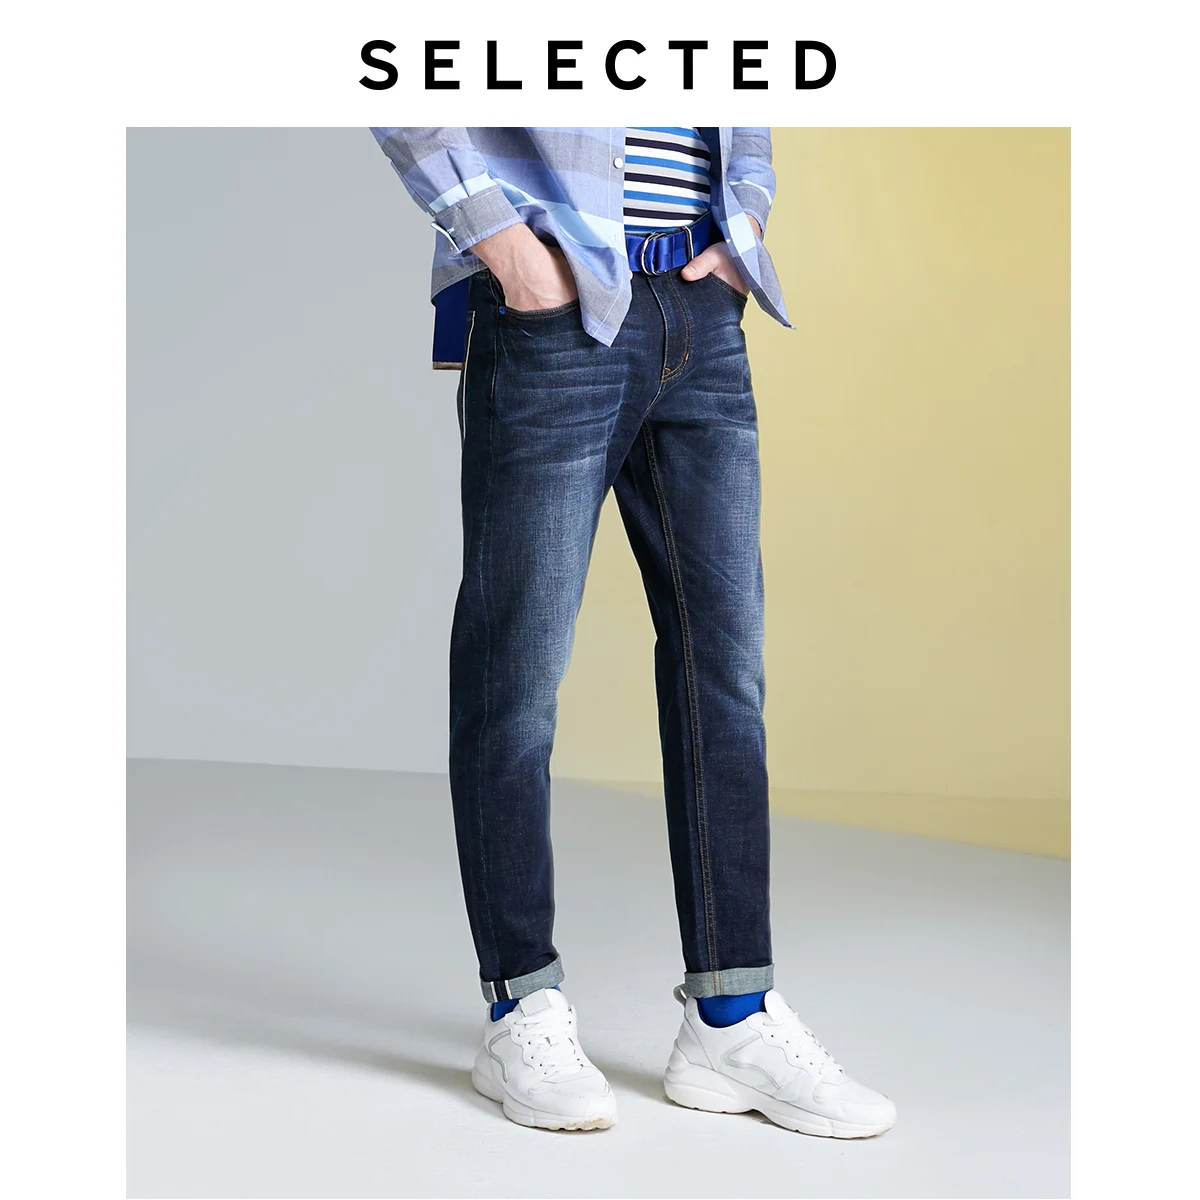 SELECTED Men's Winter Spliced Roll-up Tapered Jeans L|419432525